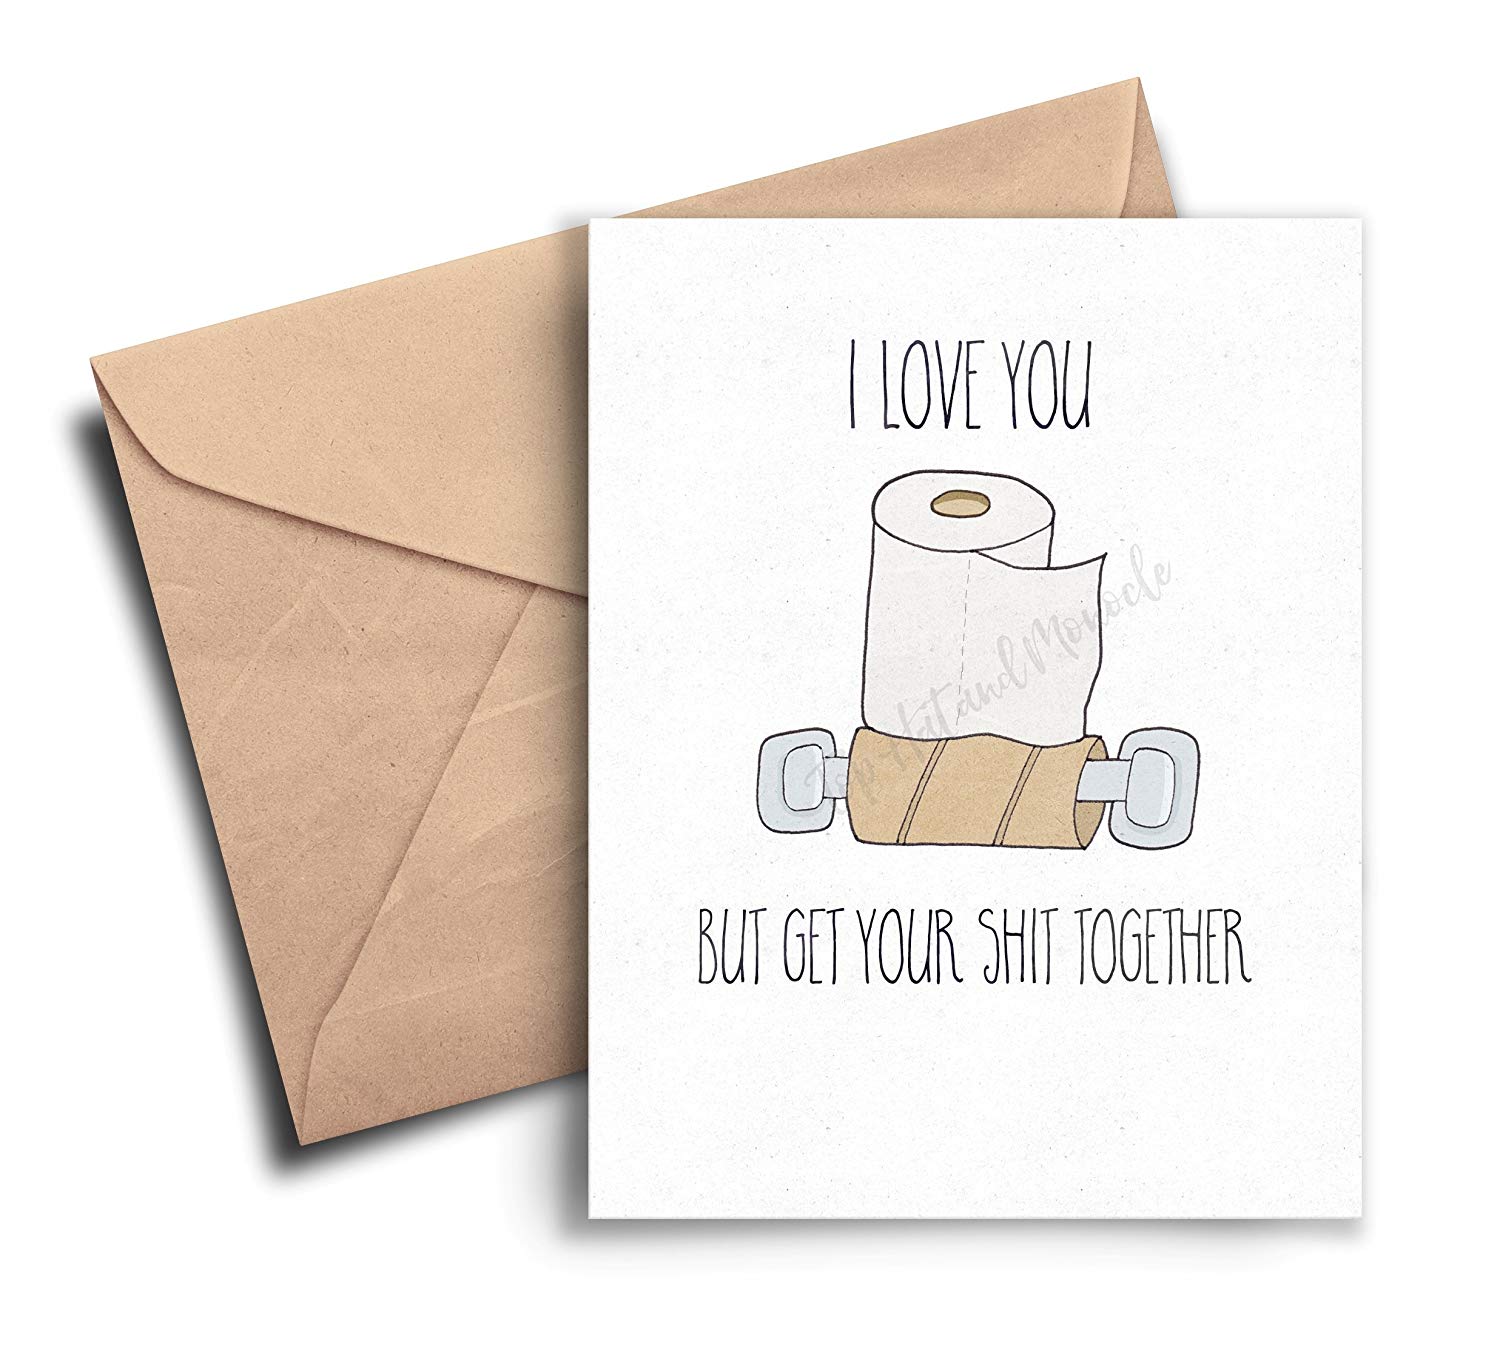 Hilarious VDay Cards #12